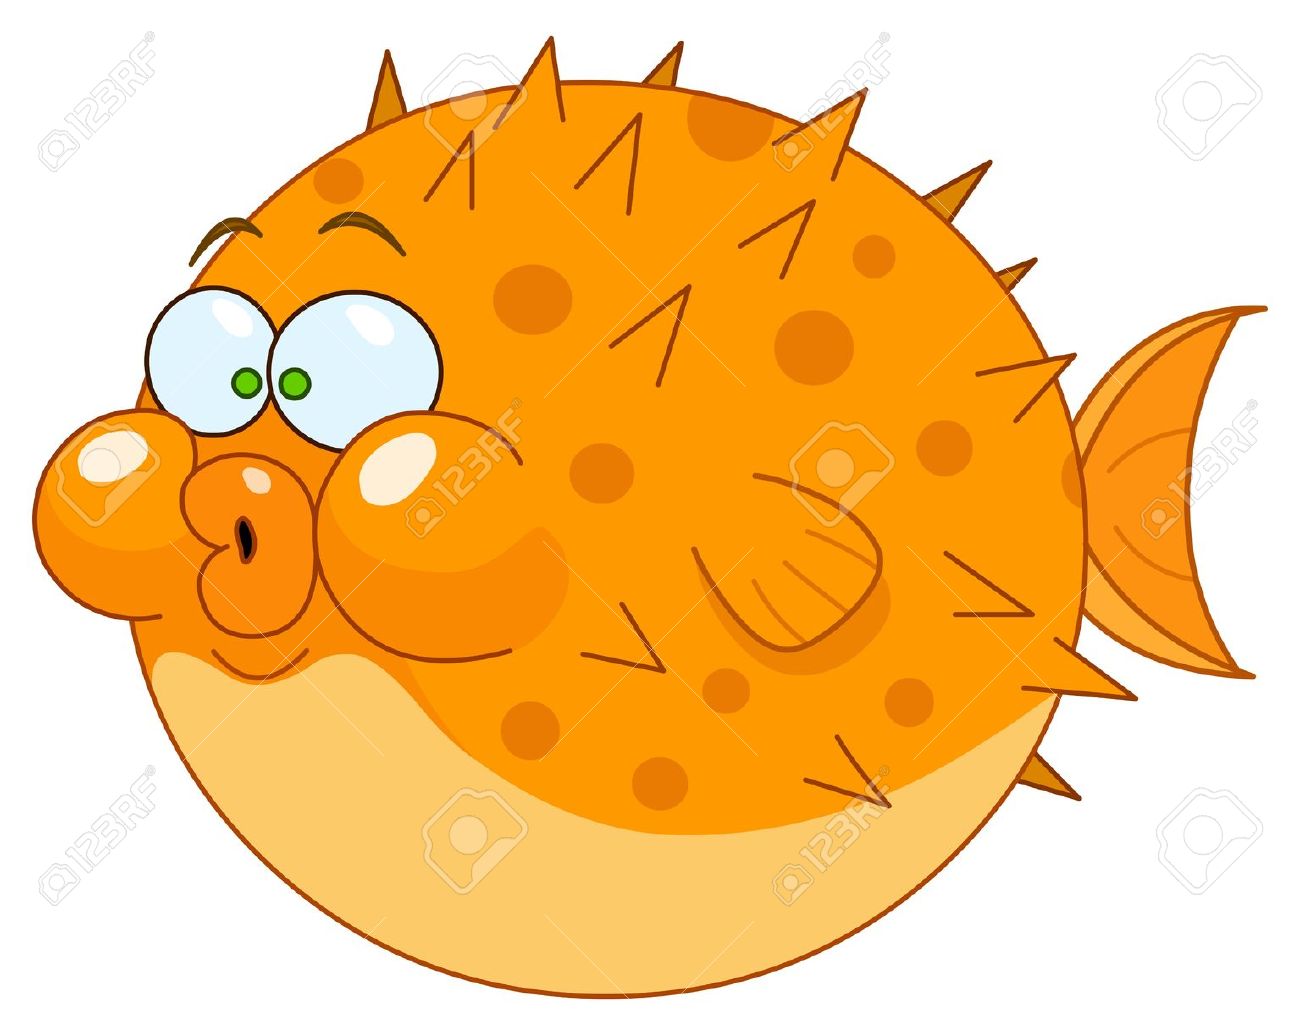 Pufferfish clipart #9, Download drawings